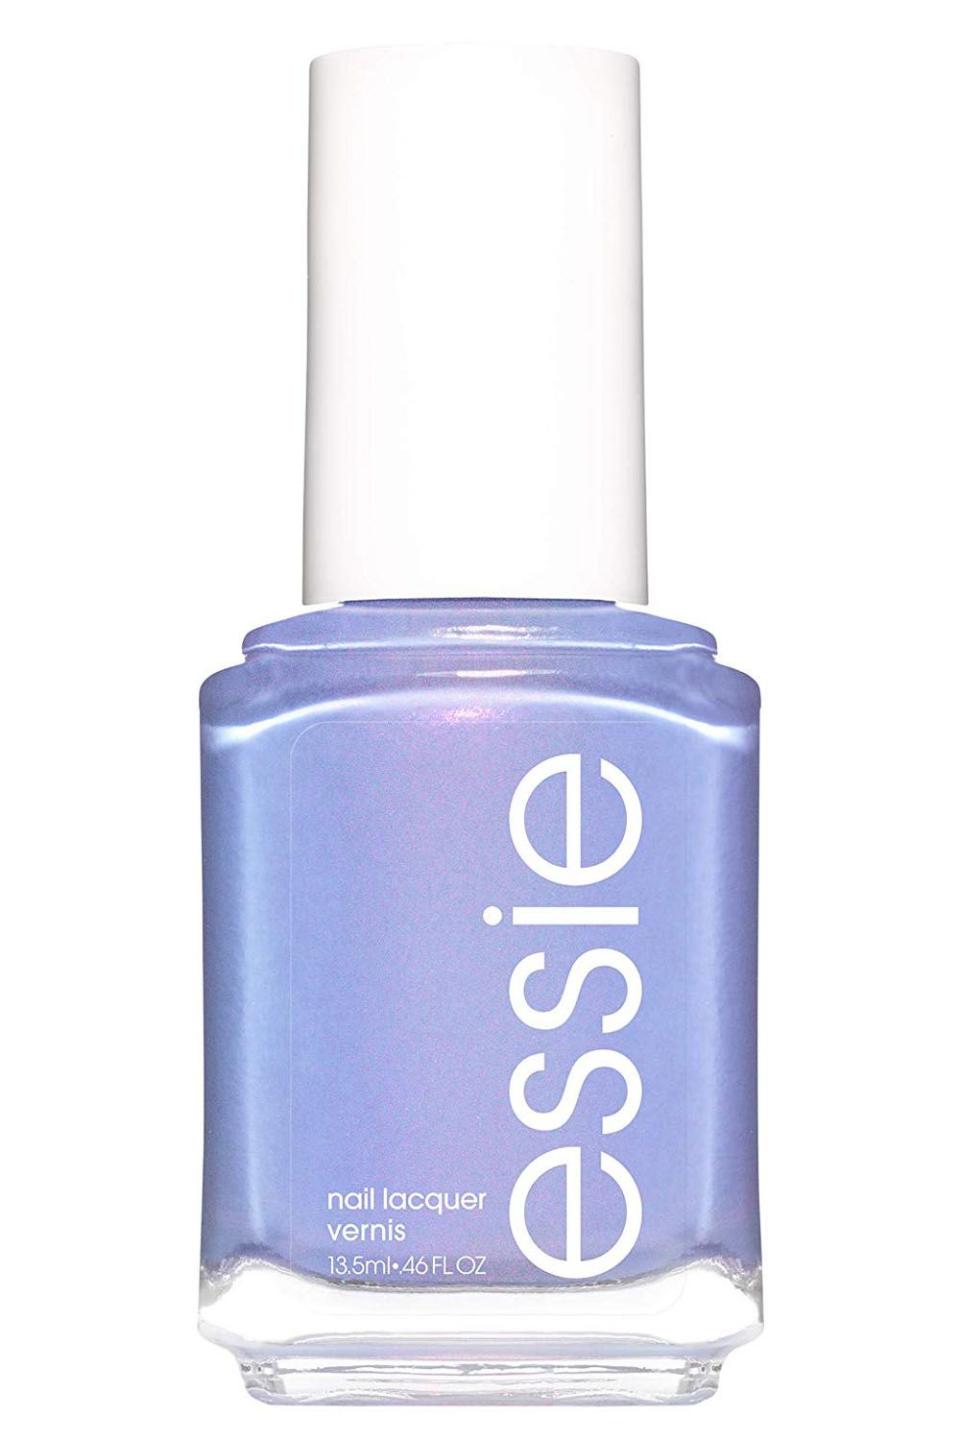 8) Essie Flying Solo Nail Polish in You Do Blue